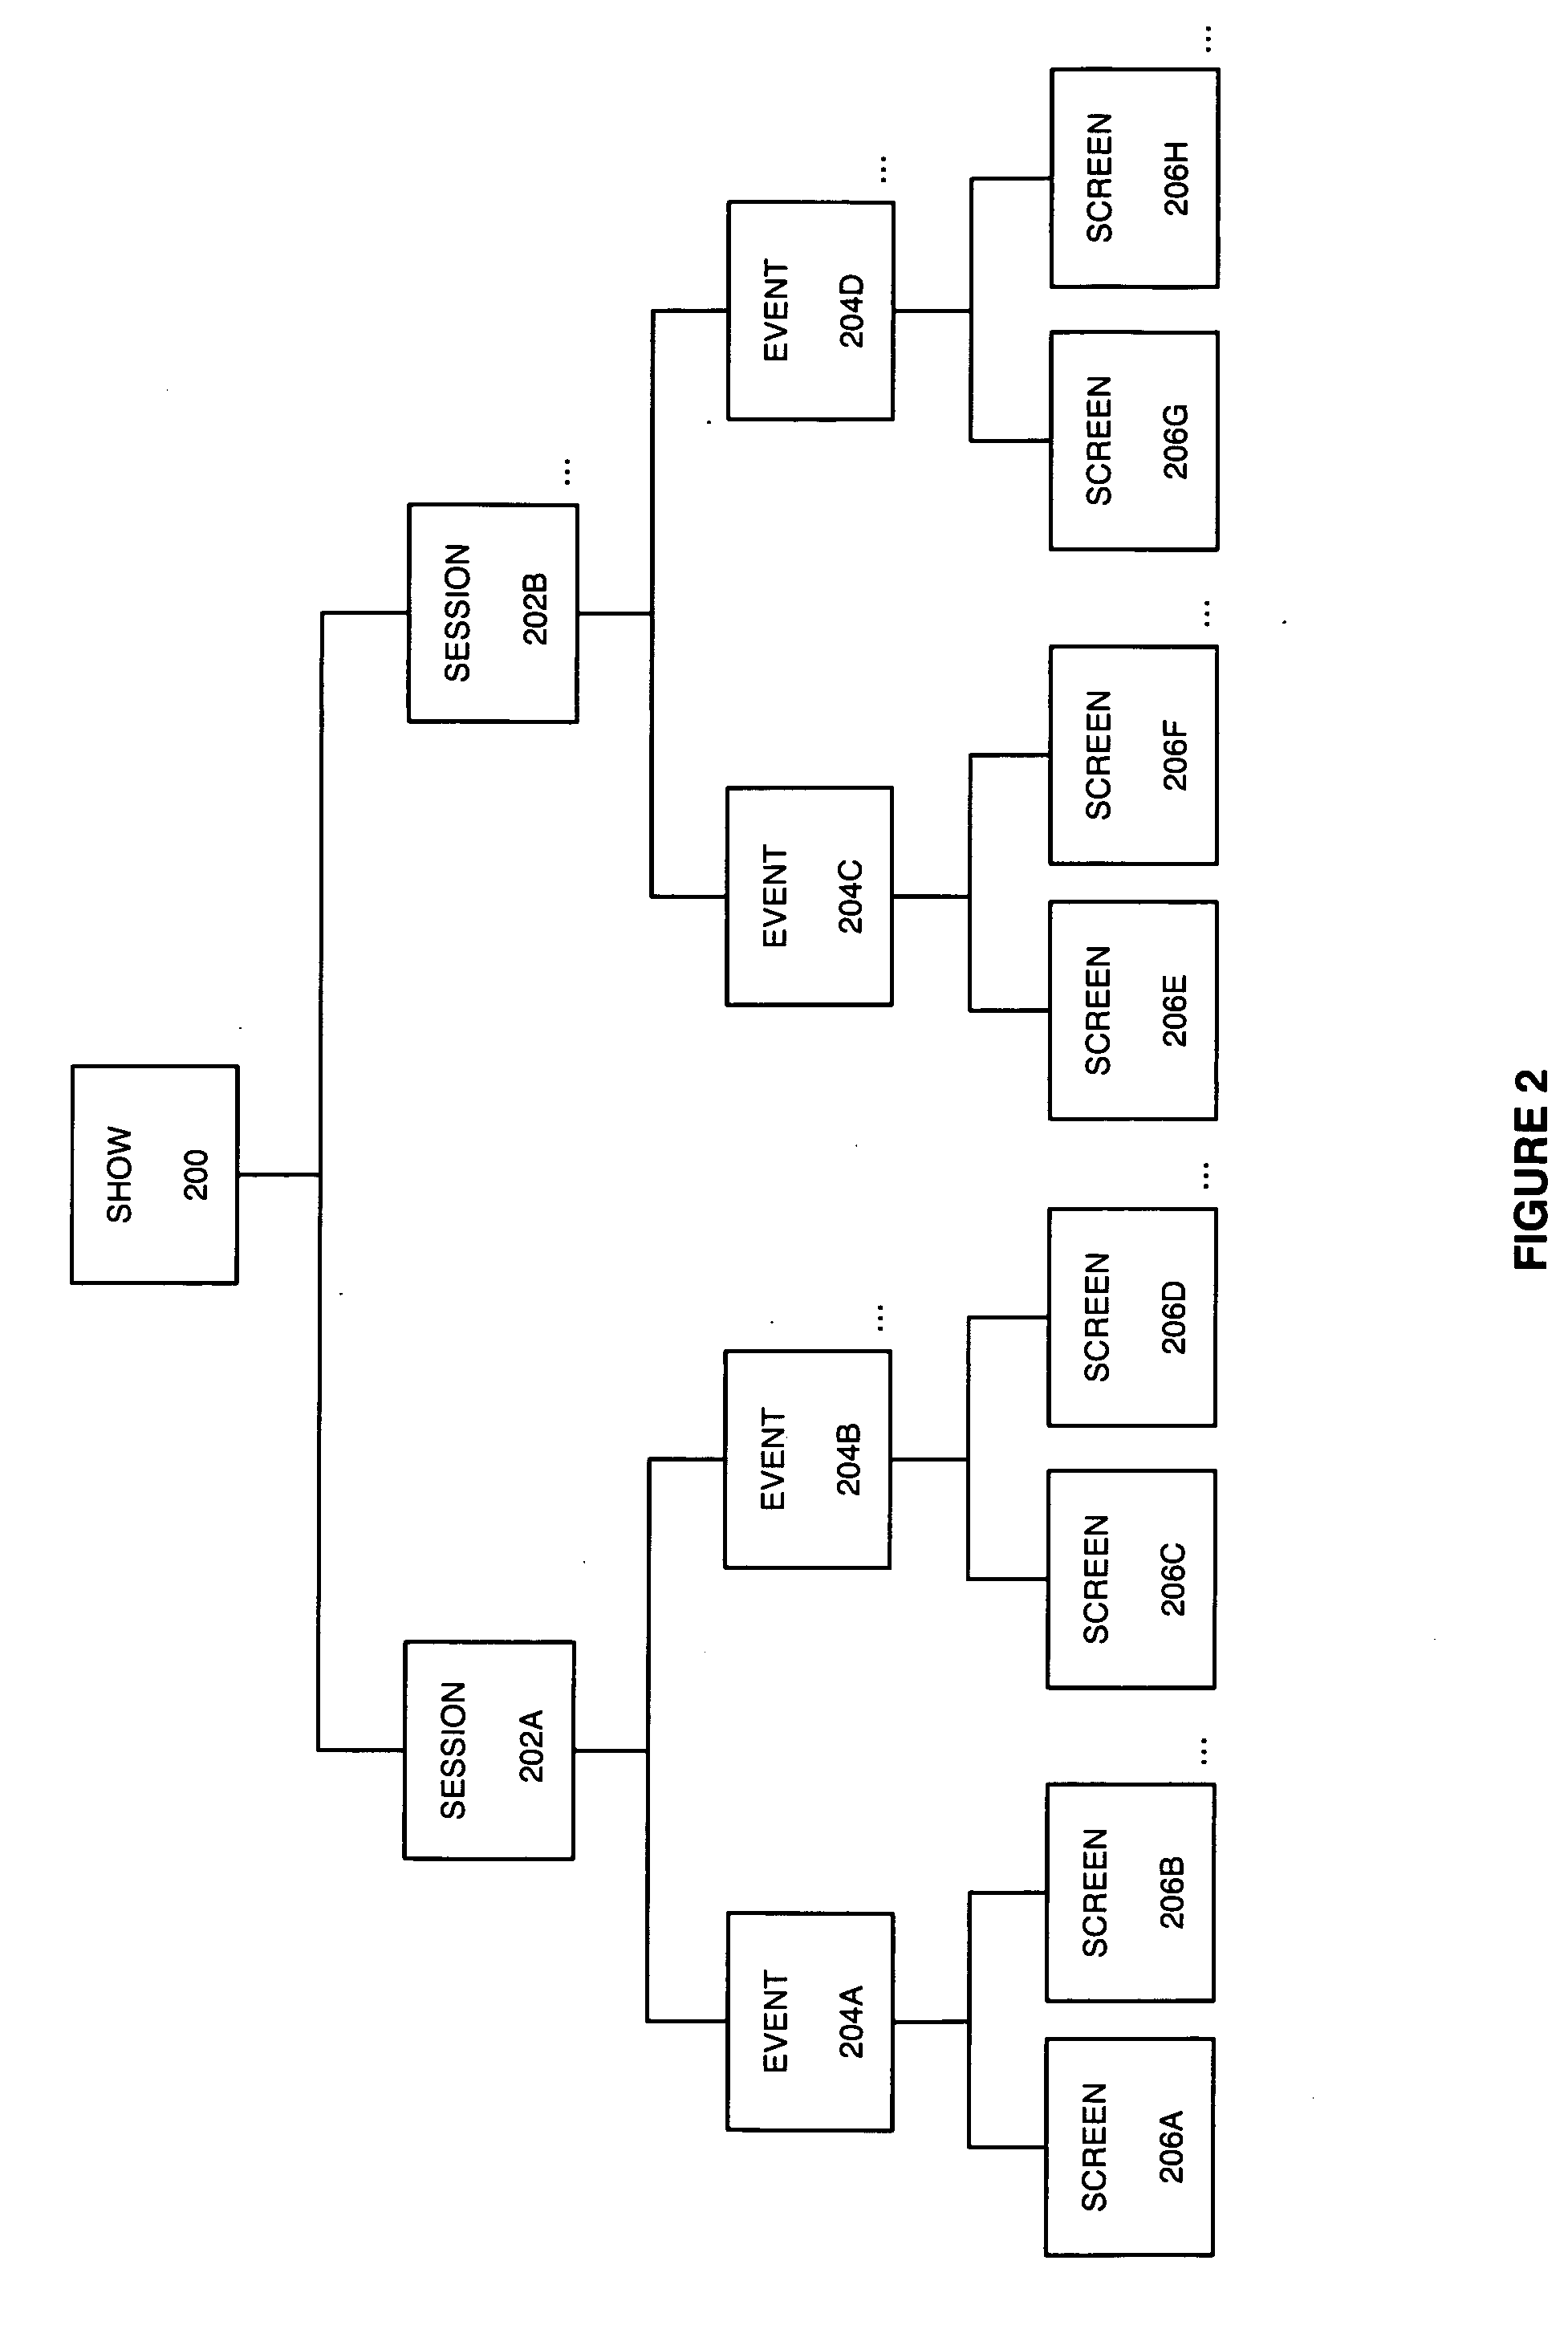 Method and system for providing adaptive rule based cognitive stimulation to a user